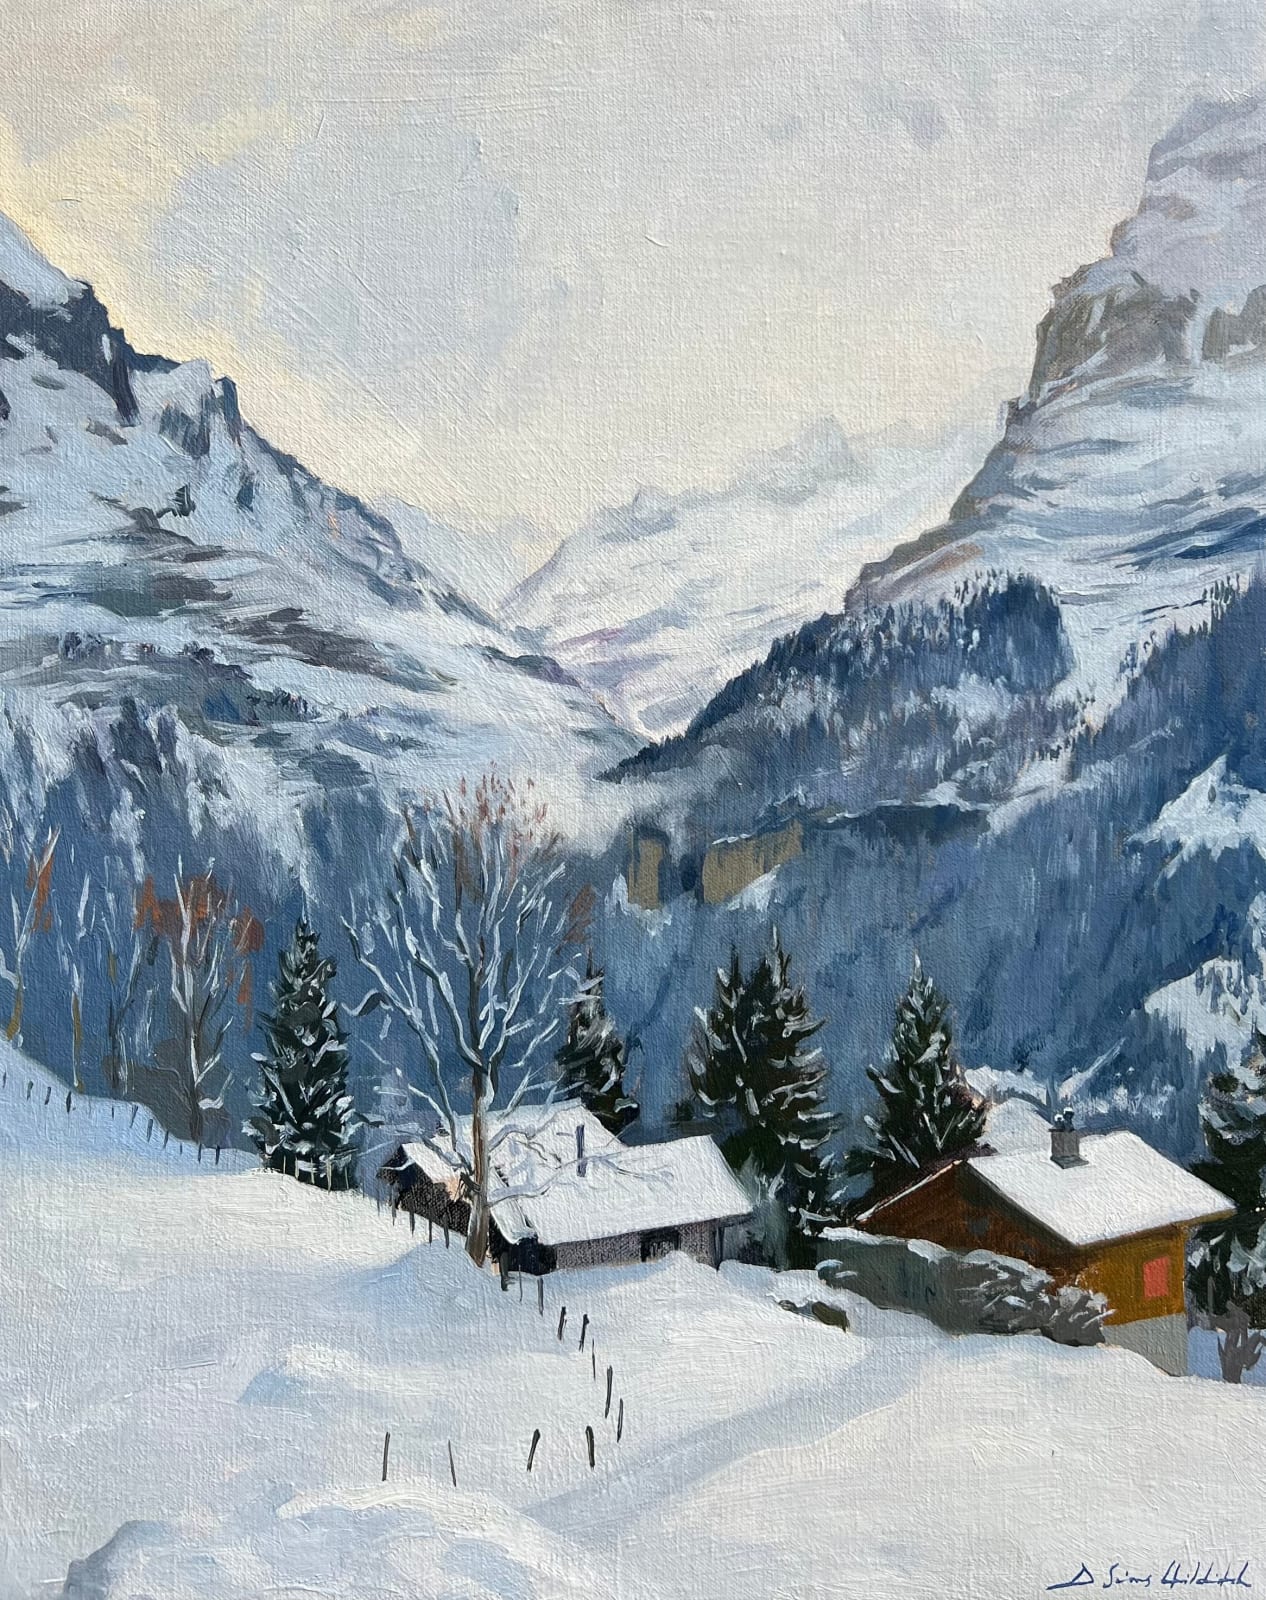 Daisy Sims Hilditch, Quiet snowfall in the Grindelwald valley, 2022